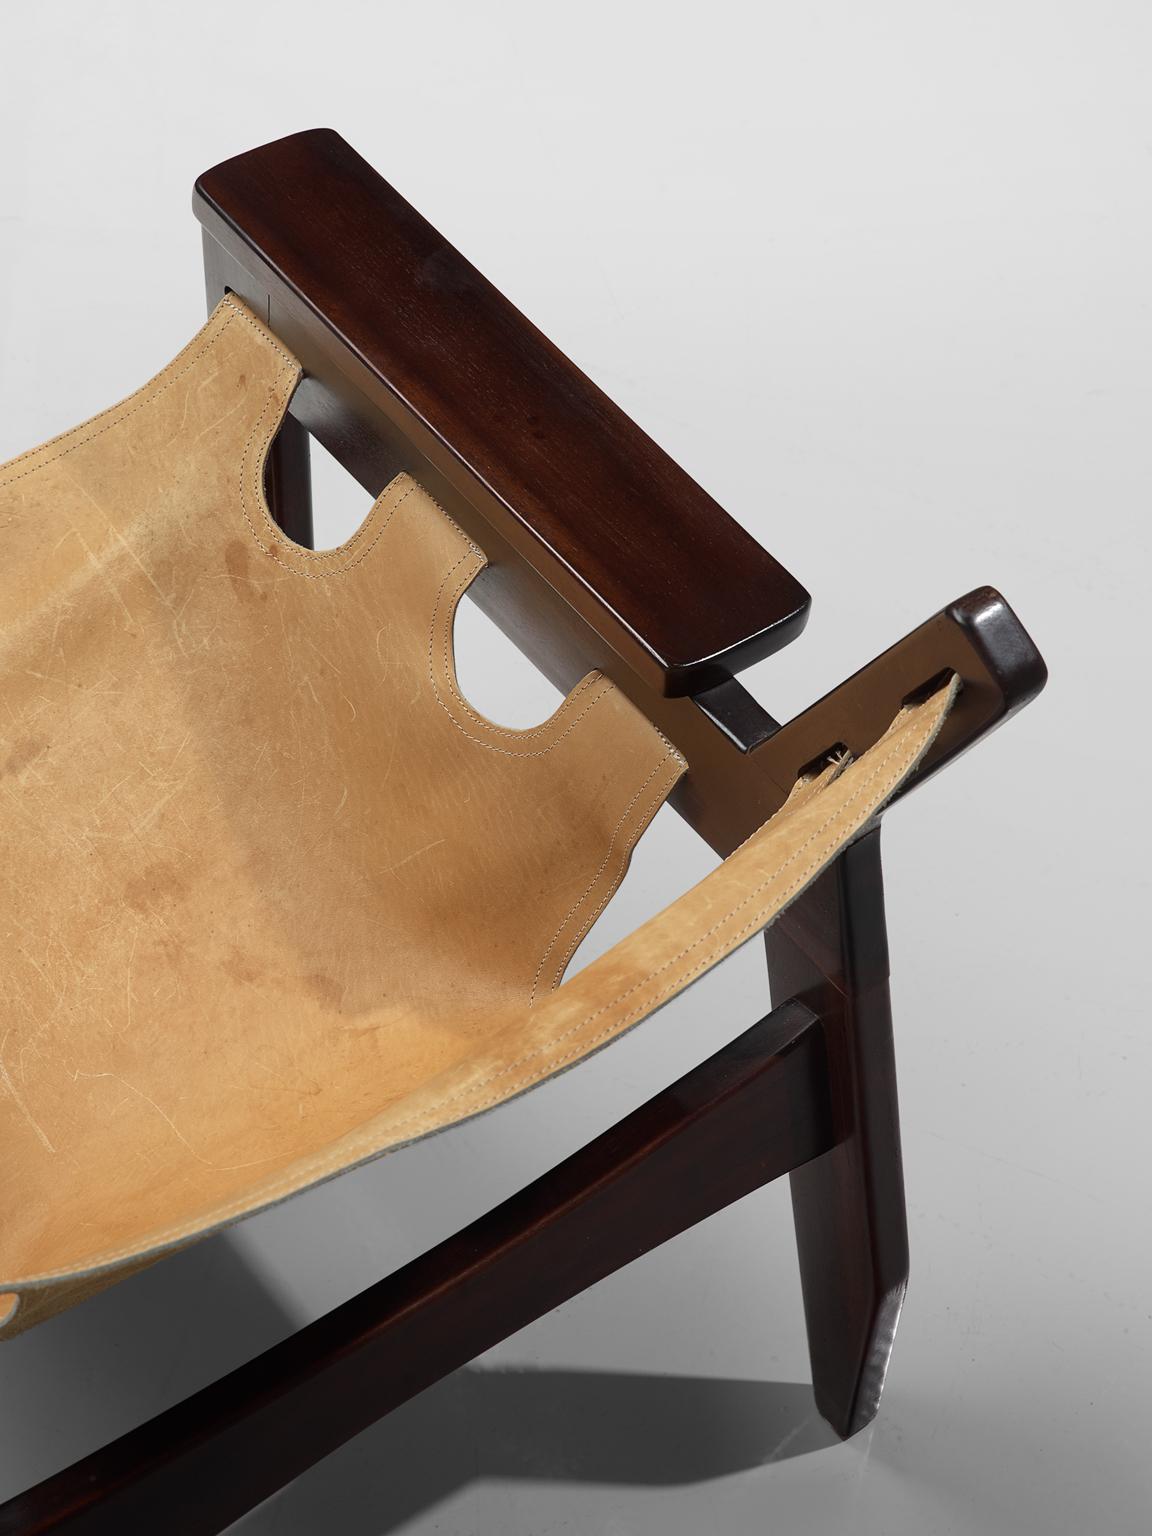 Sergio Rodrigues 'Kilin' Rosewood Armchair with Beige Leather 2